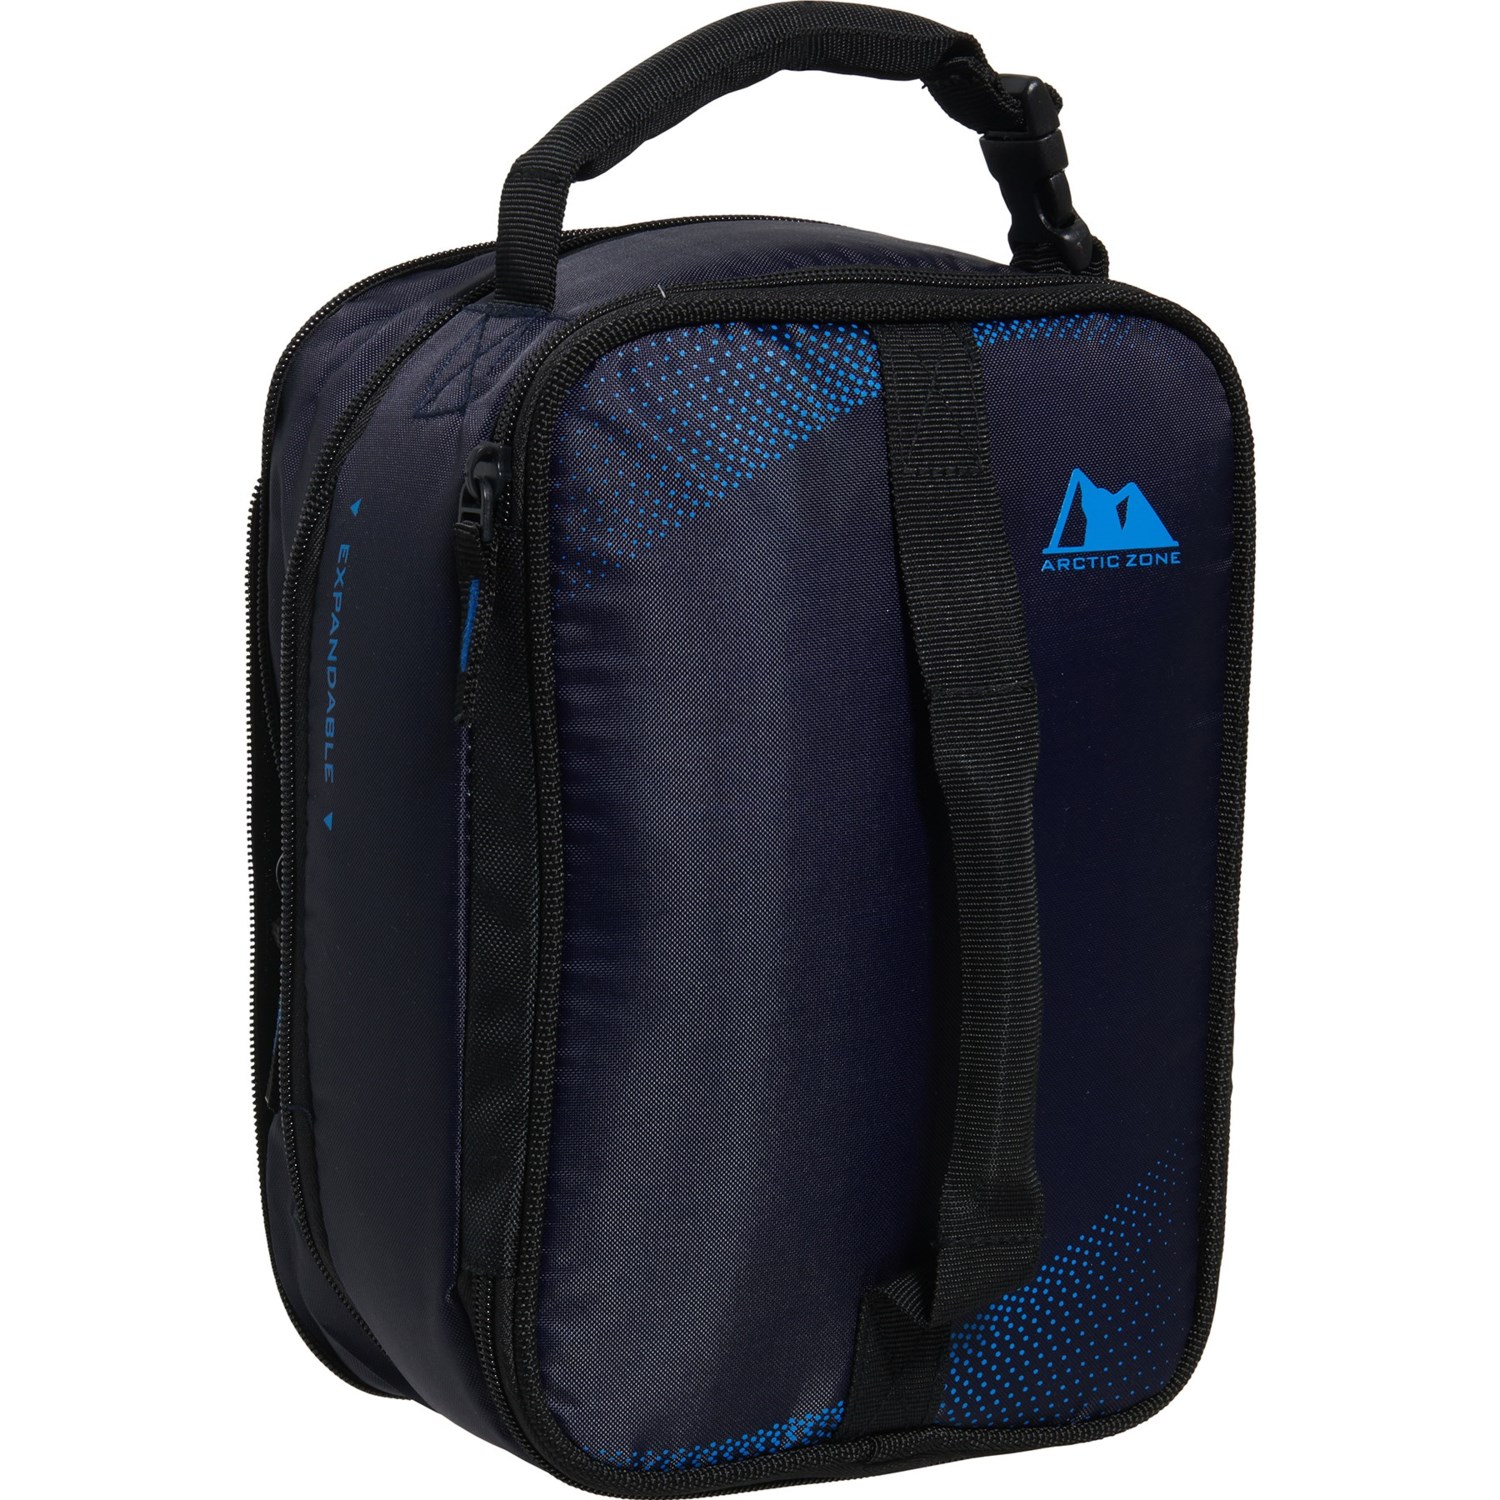 https://i.stpost.com/arctic-zone-expandable-upright-lunch-pack-insulated-in-blue~p~1rthj_01~1500.2.jpg